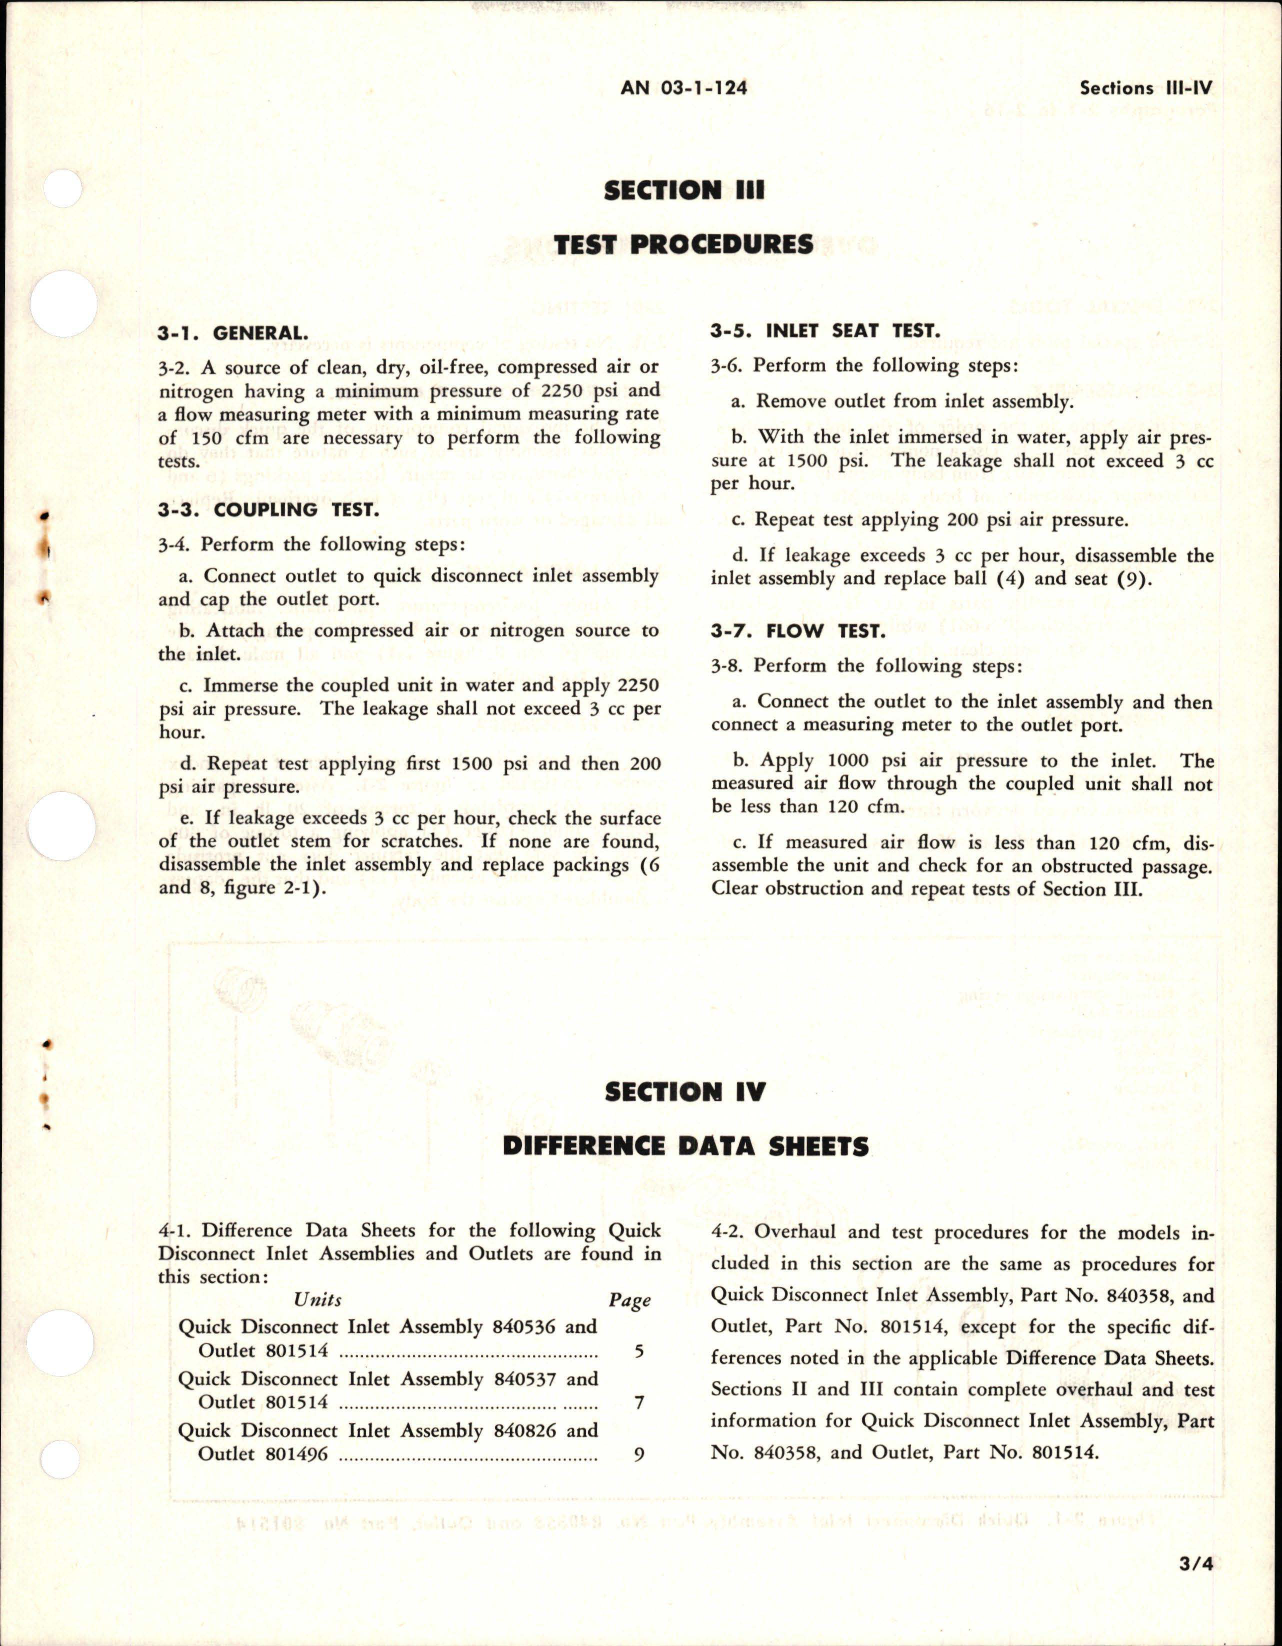 Sample page 7 from AirCorps Library document: Overhaul Instructions for Quick Disconnect Inlet Assembly and Outlet